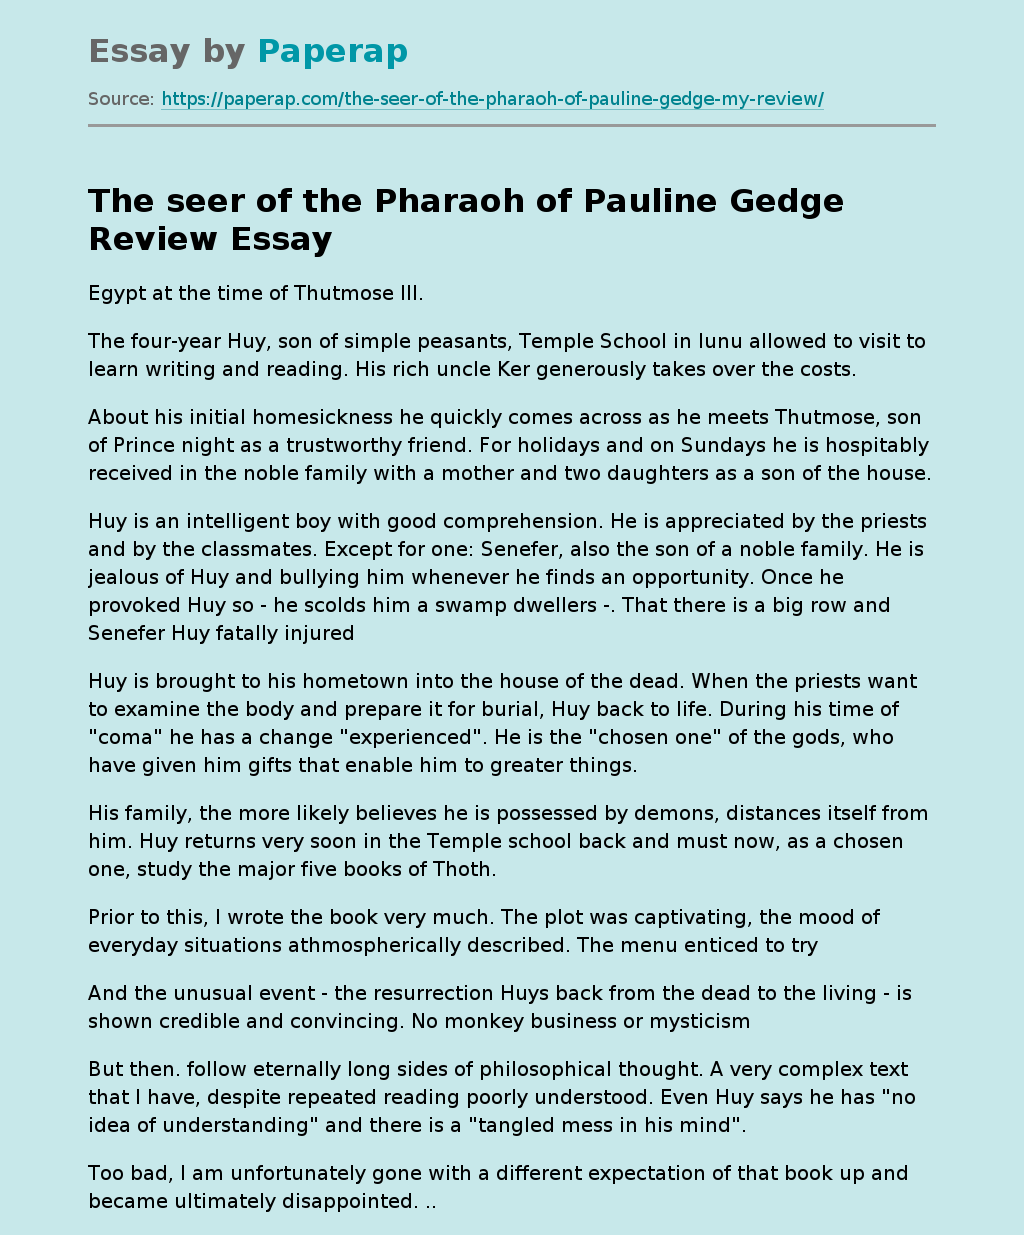 The seer of the Pharaoh of Pauline Gedge Review